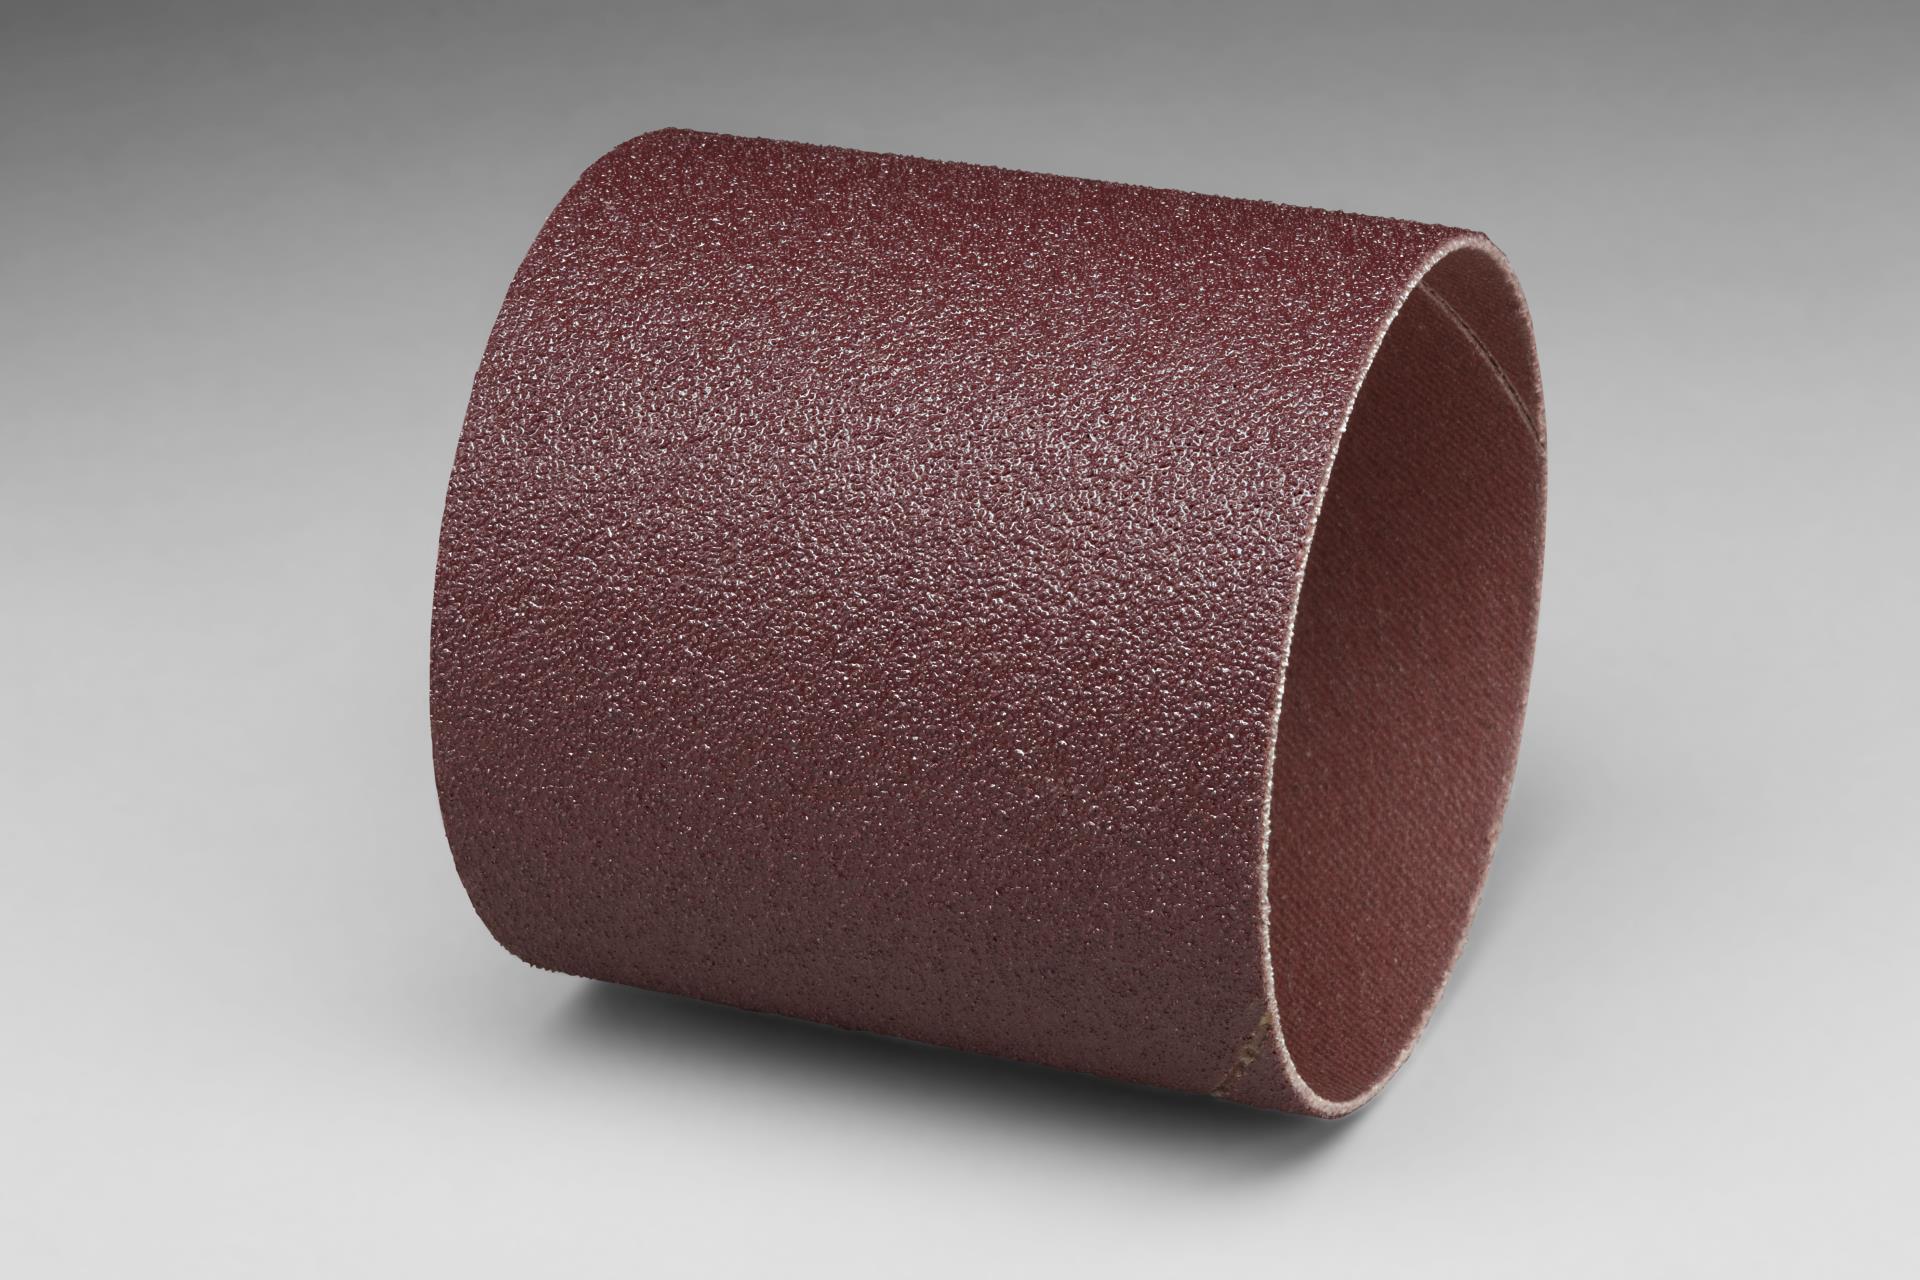 Rayon Cloth Backing Pack of 10 3M 14576 Flap Wheel Type 84 244D Aluminum Oxide 2 x 1 x 1/4-20 External 80 X-Weight Pack of 10 1 Width Abrasive Grit 2 x 1 x 1/4-20 External 80 X-Weight 1 Width 